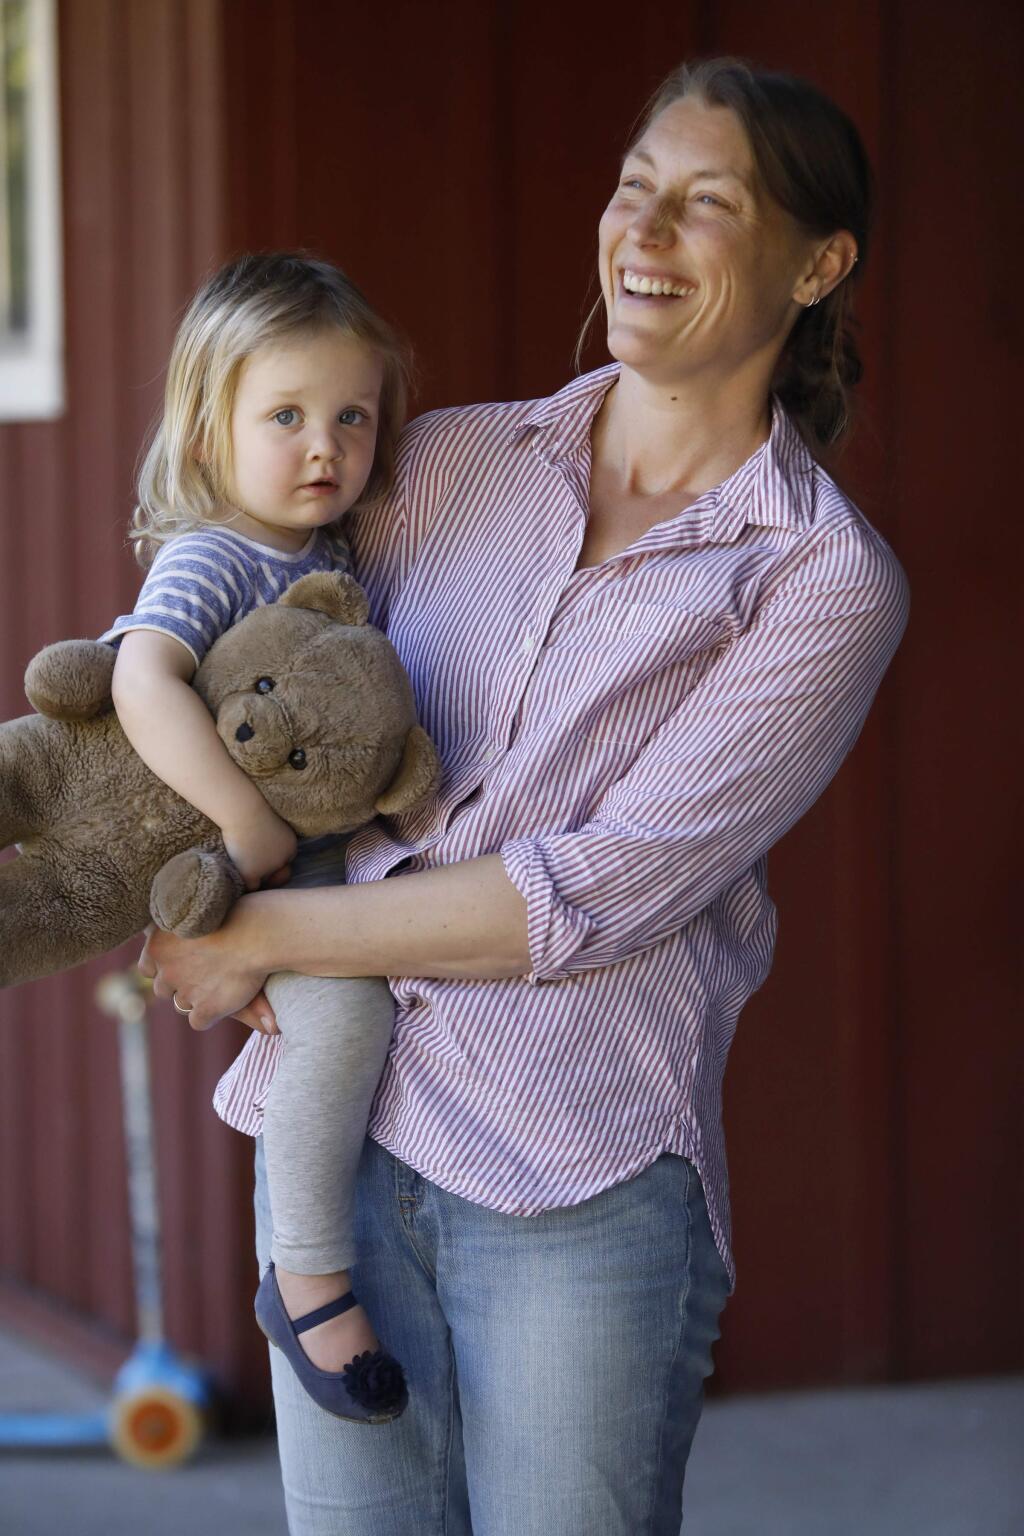 Nicole Spiridakis and her daughter Elsie Wallace, 2, at their home on Tuesday, November 6, 2018 in Sebastopol, California . (BETH SCHLANKER/The Press Democrat)